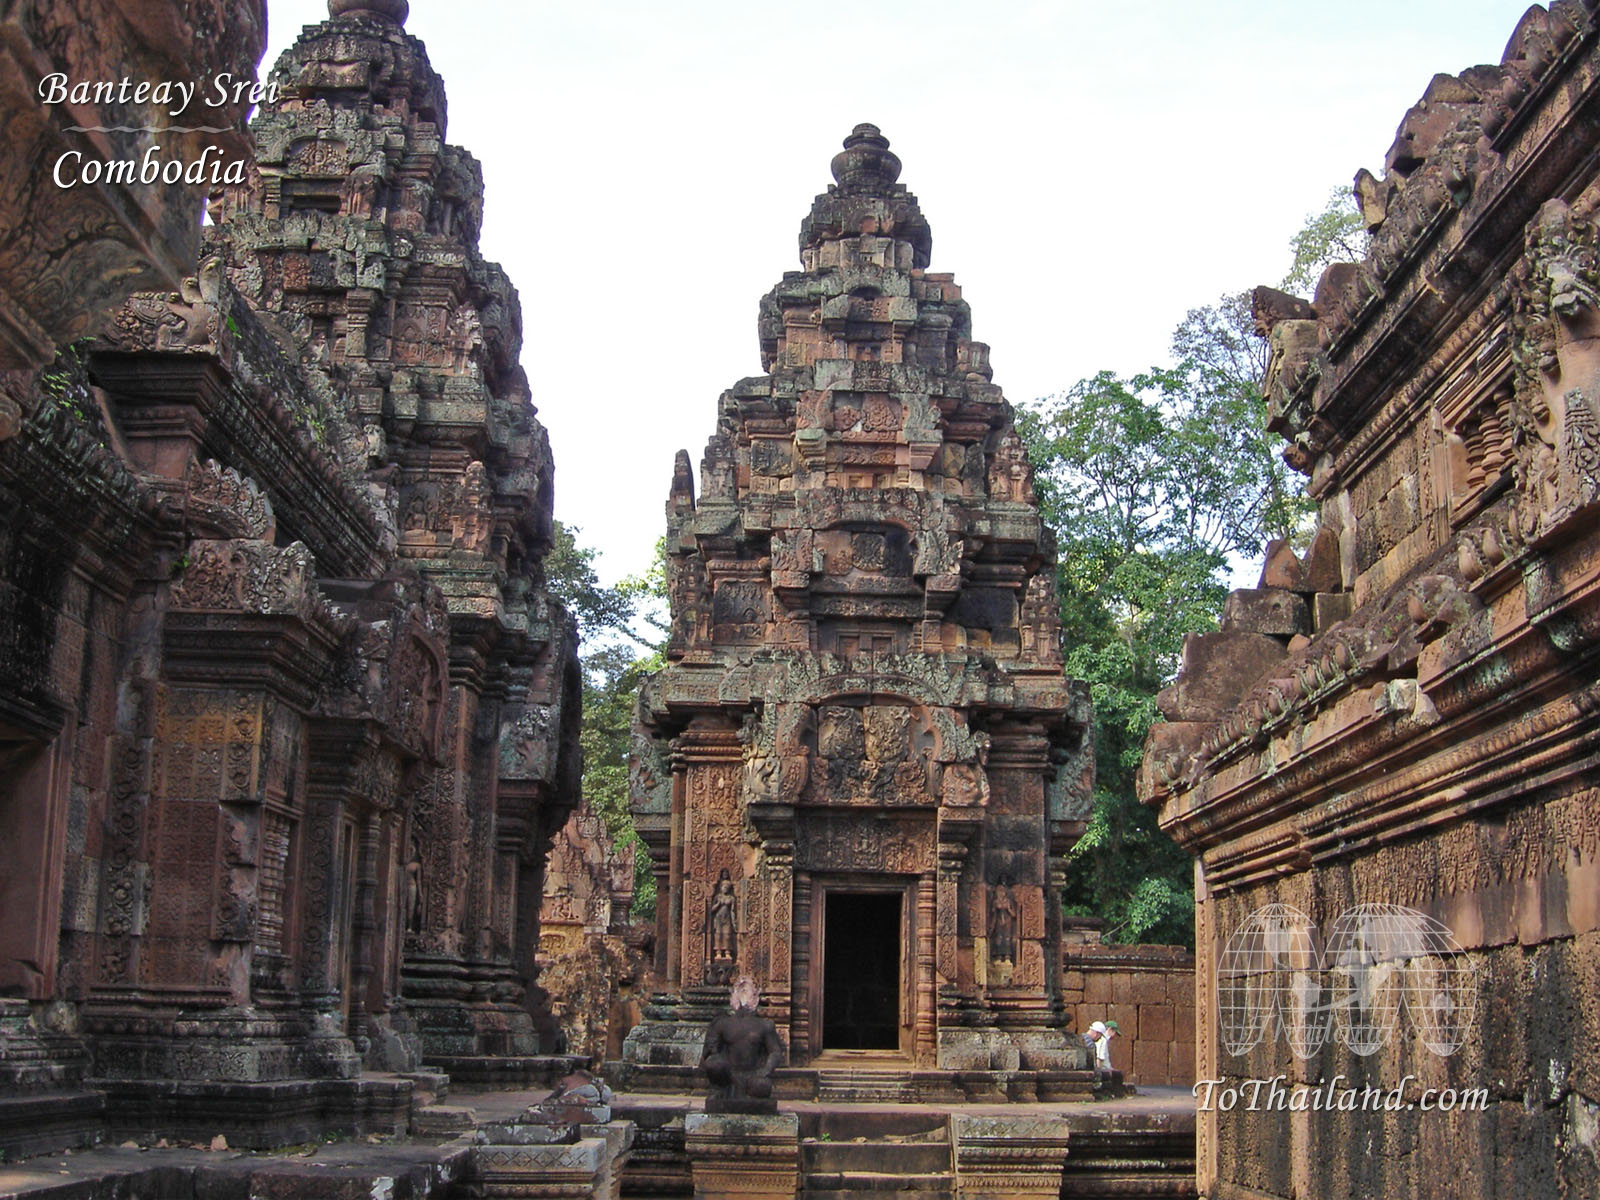 Related Posts Cambodia Wallpaper Travel Photos Photo